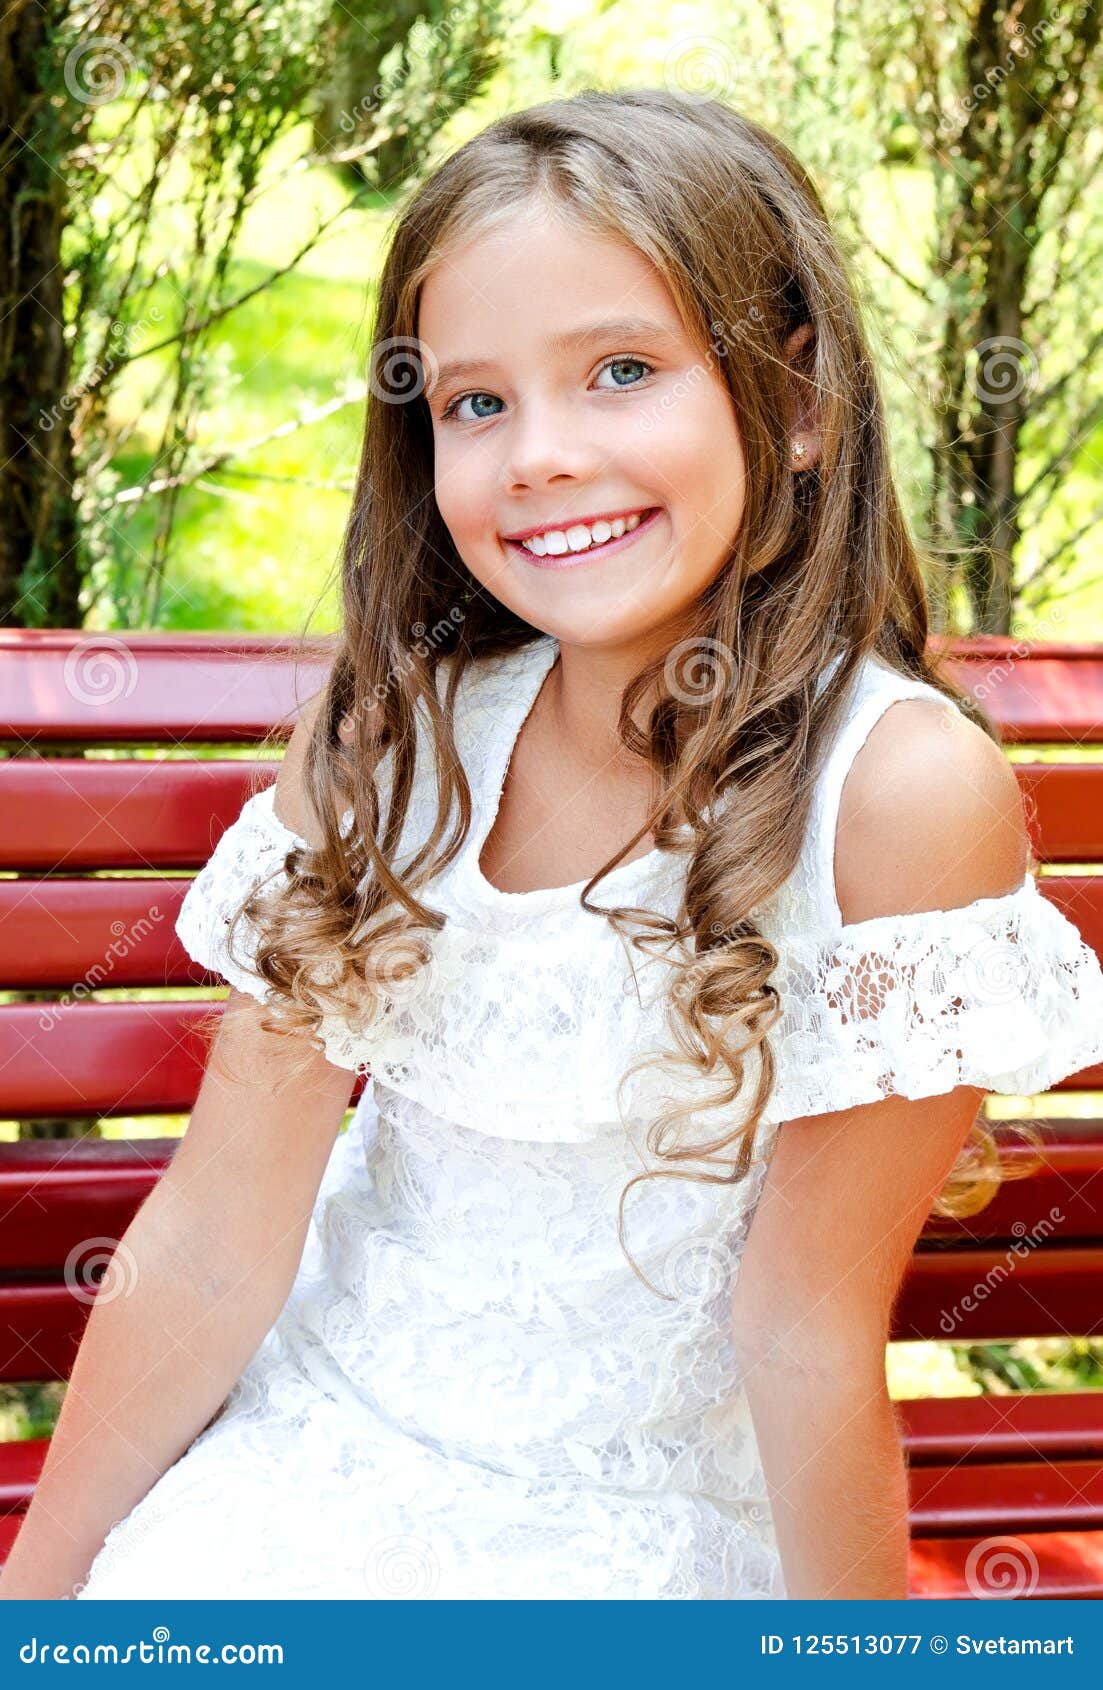 Portrait of Adorable Smiling Little Girl Child Outdoors Stock Image ...